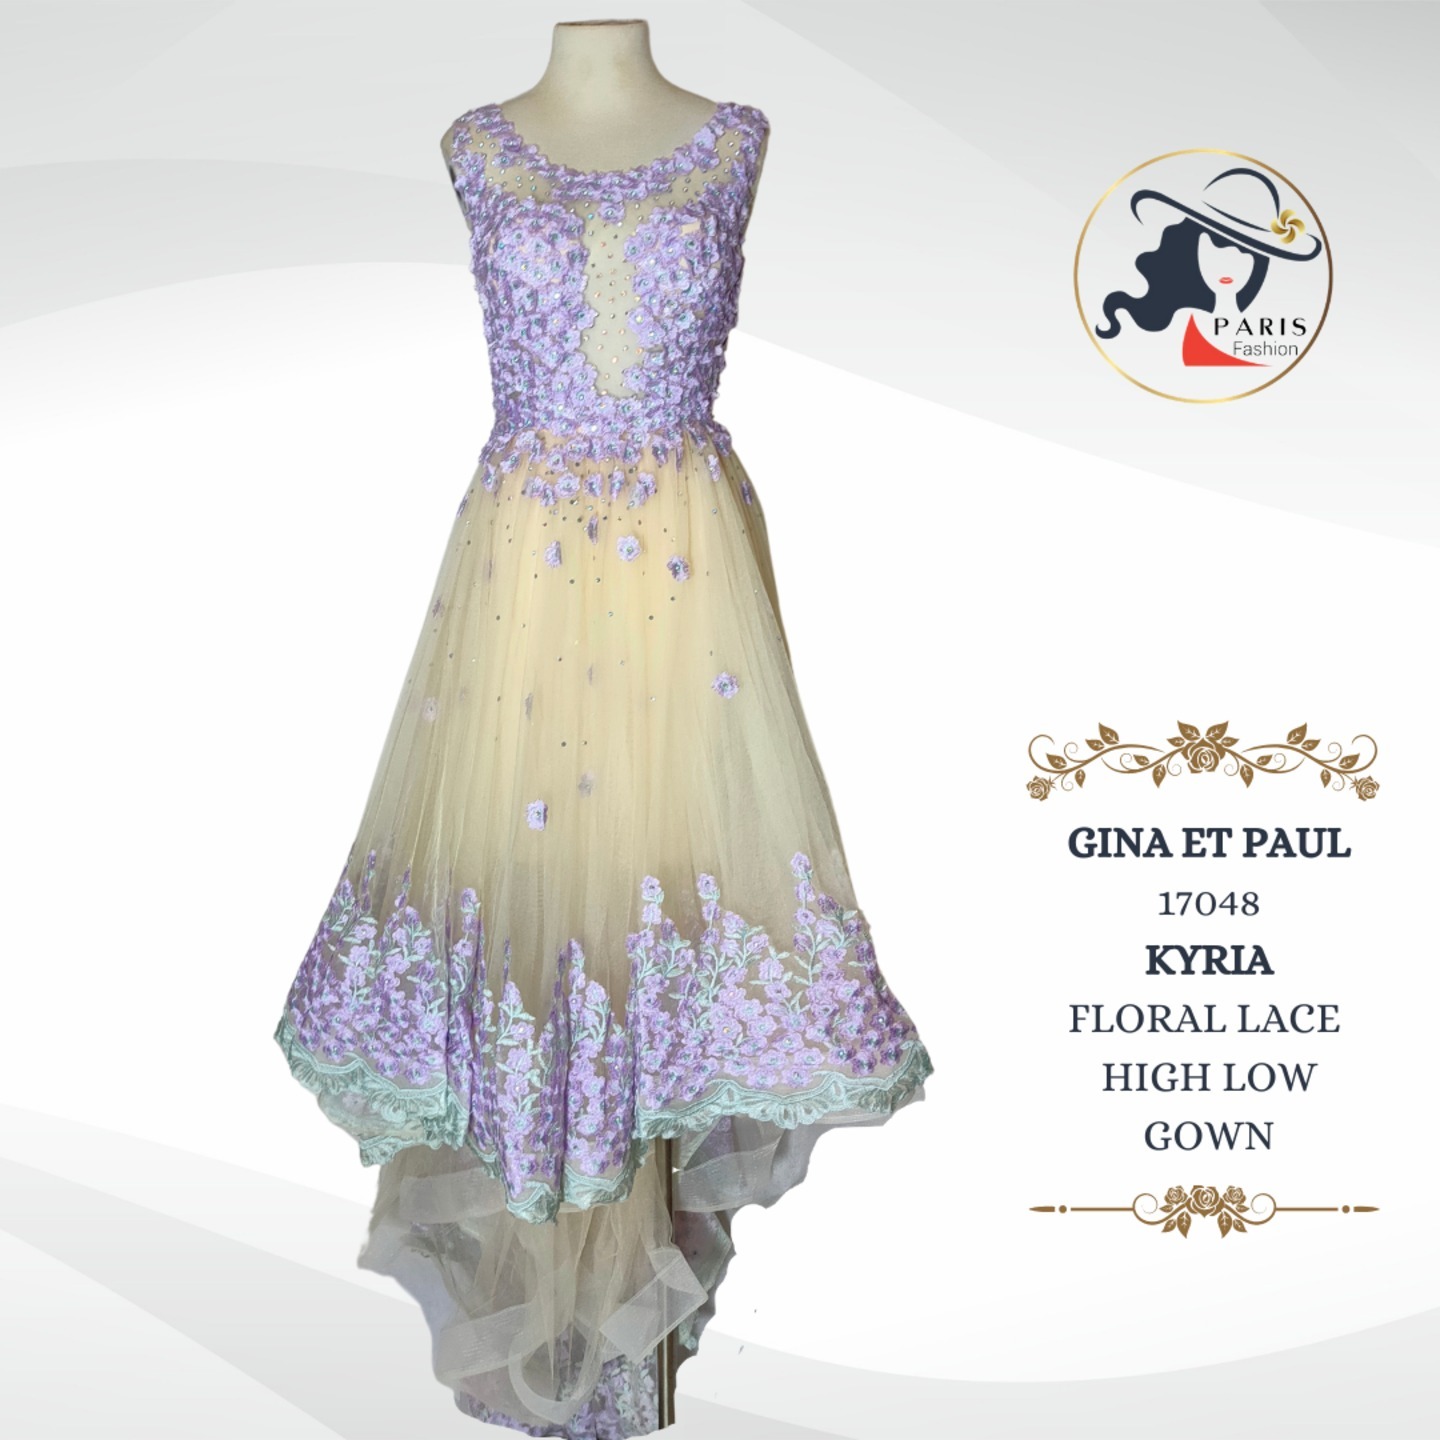 GINA ET PAUL 17048 KYRIA FLORAL LACE HIGH LOW GOWN